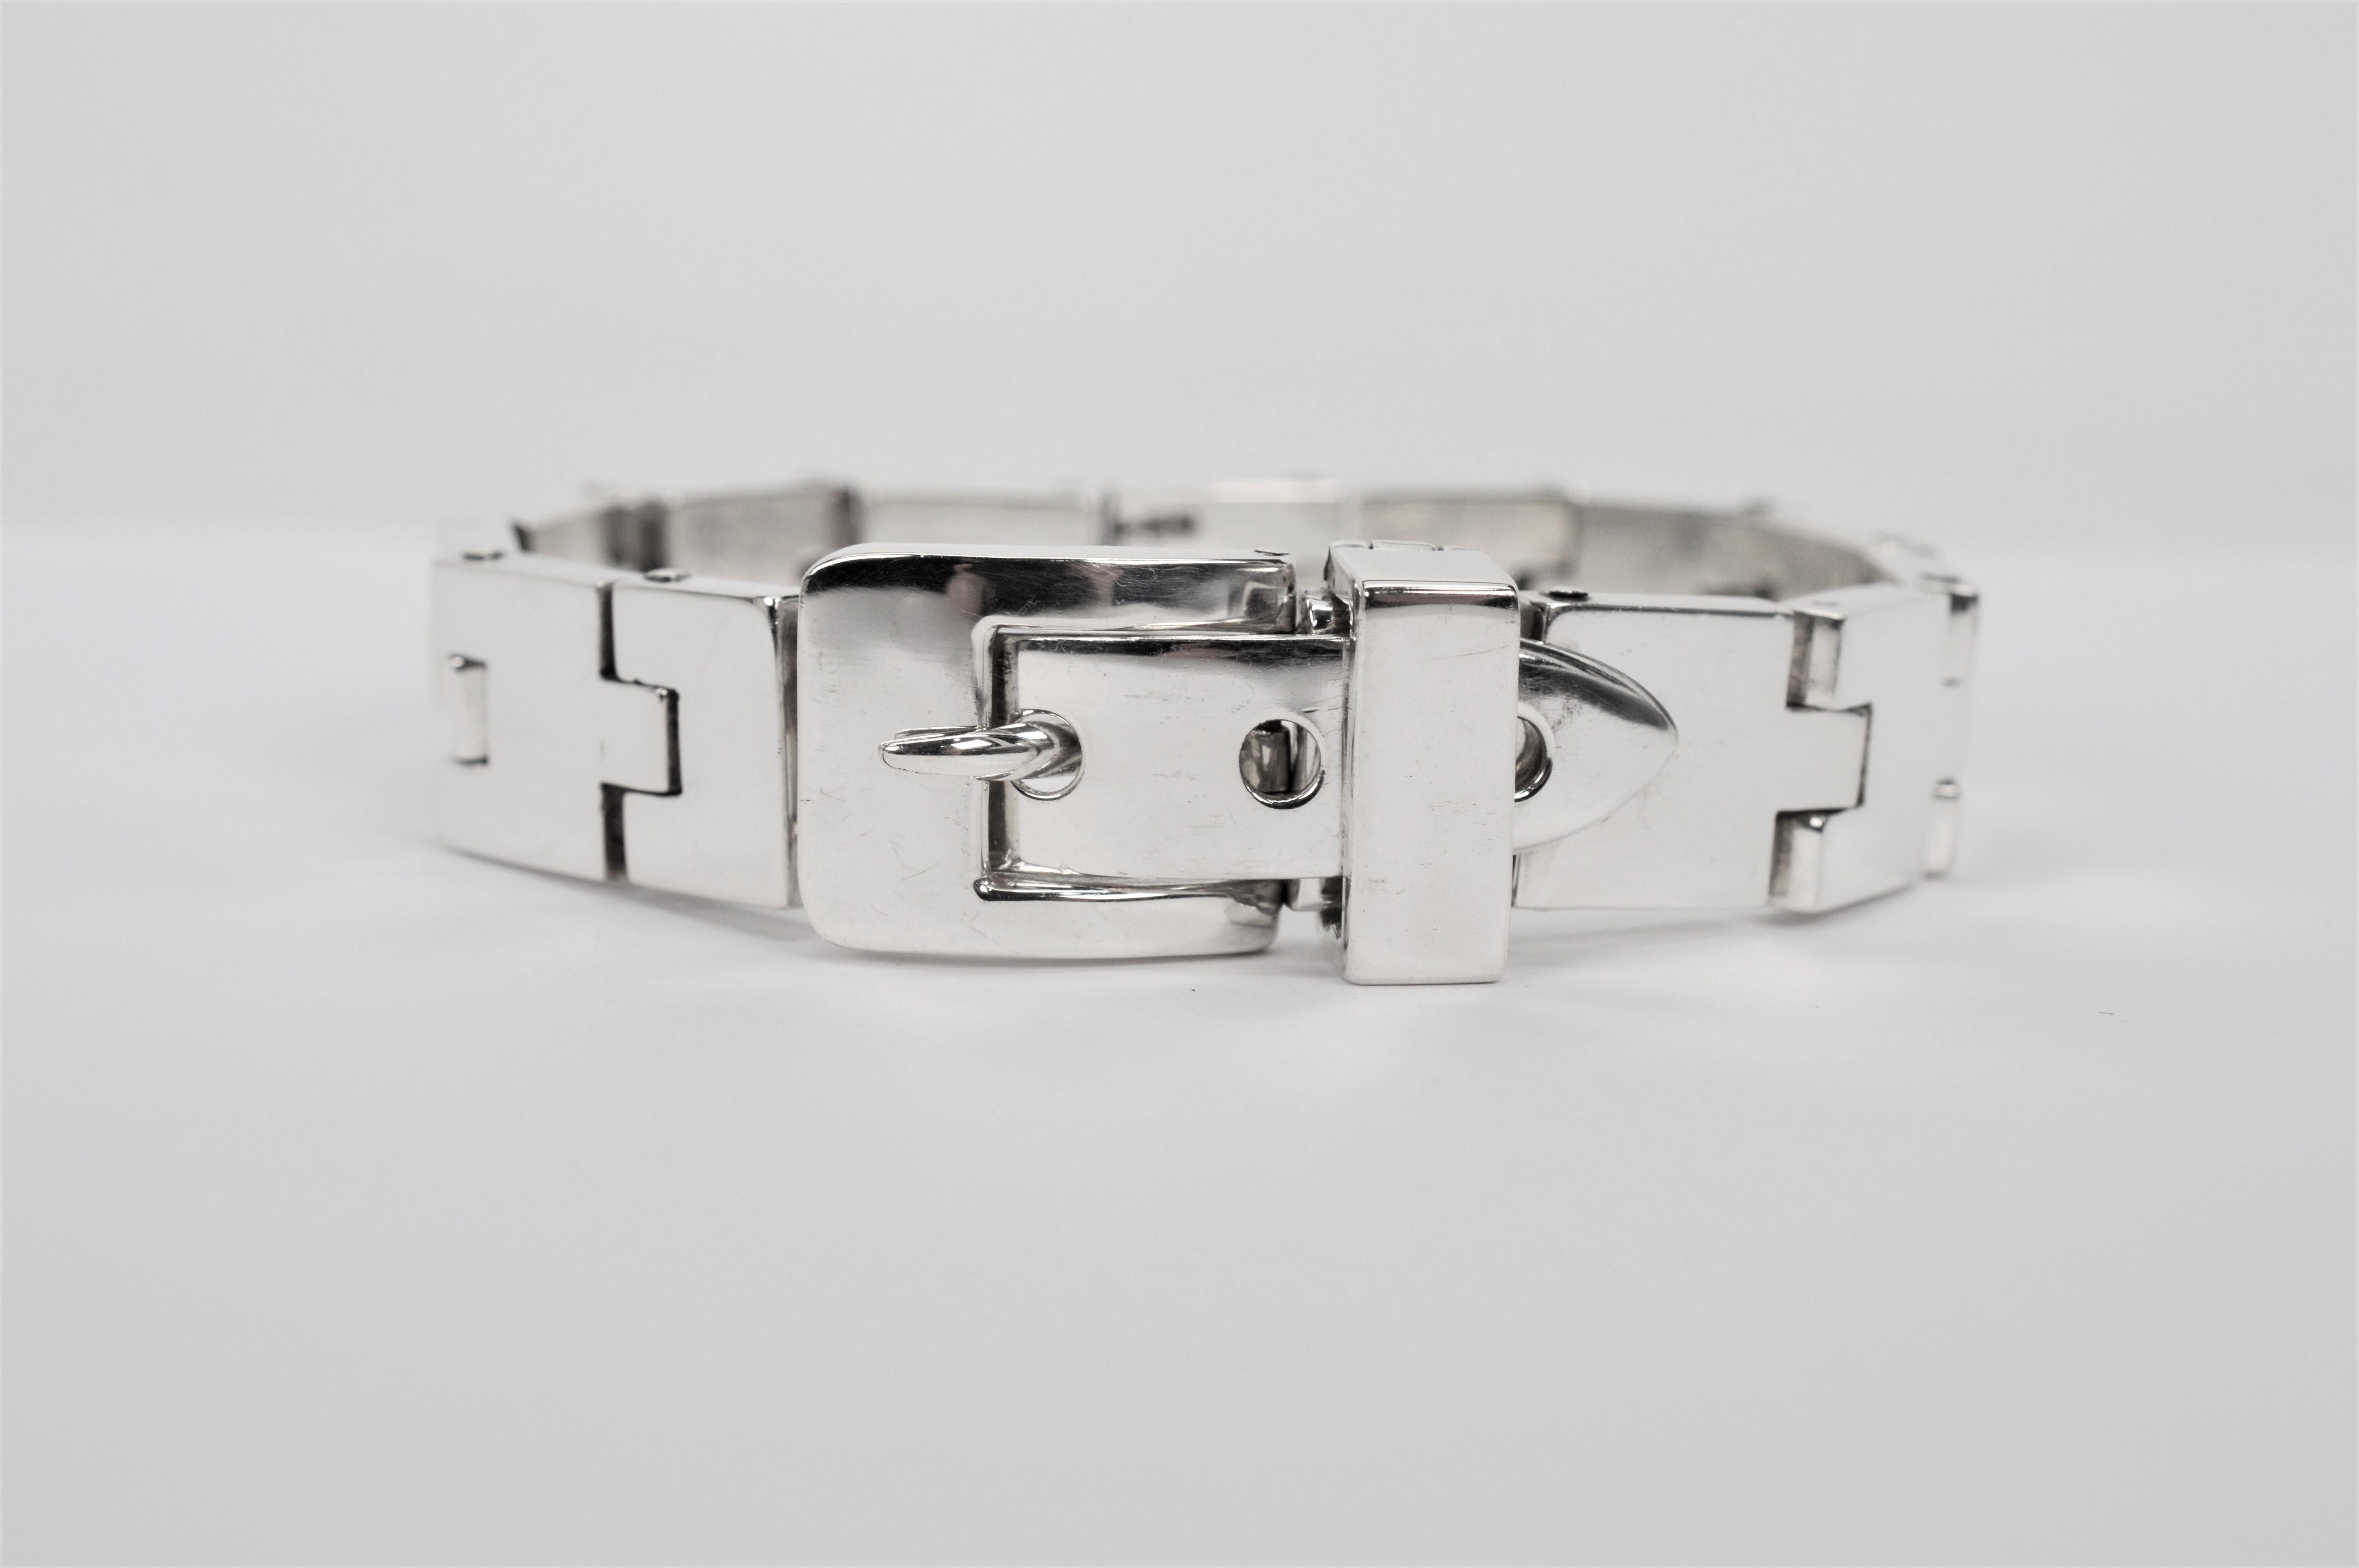 Substantial in heft, multiple hinged sterling silver links, 3.5mm thick, create this interesting 7-1/2 inch bold bracelet and lead to the large polished silver buckle clasp feature. Crafted in sterling, the 